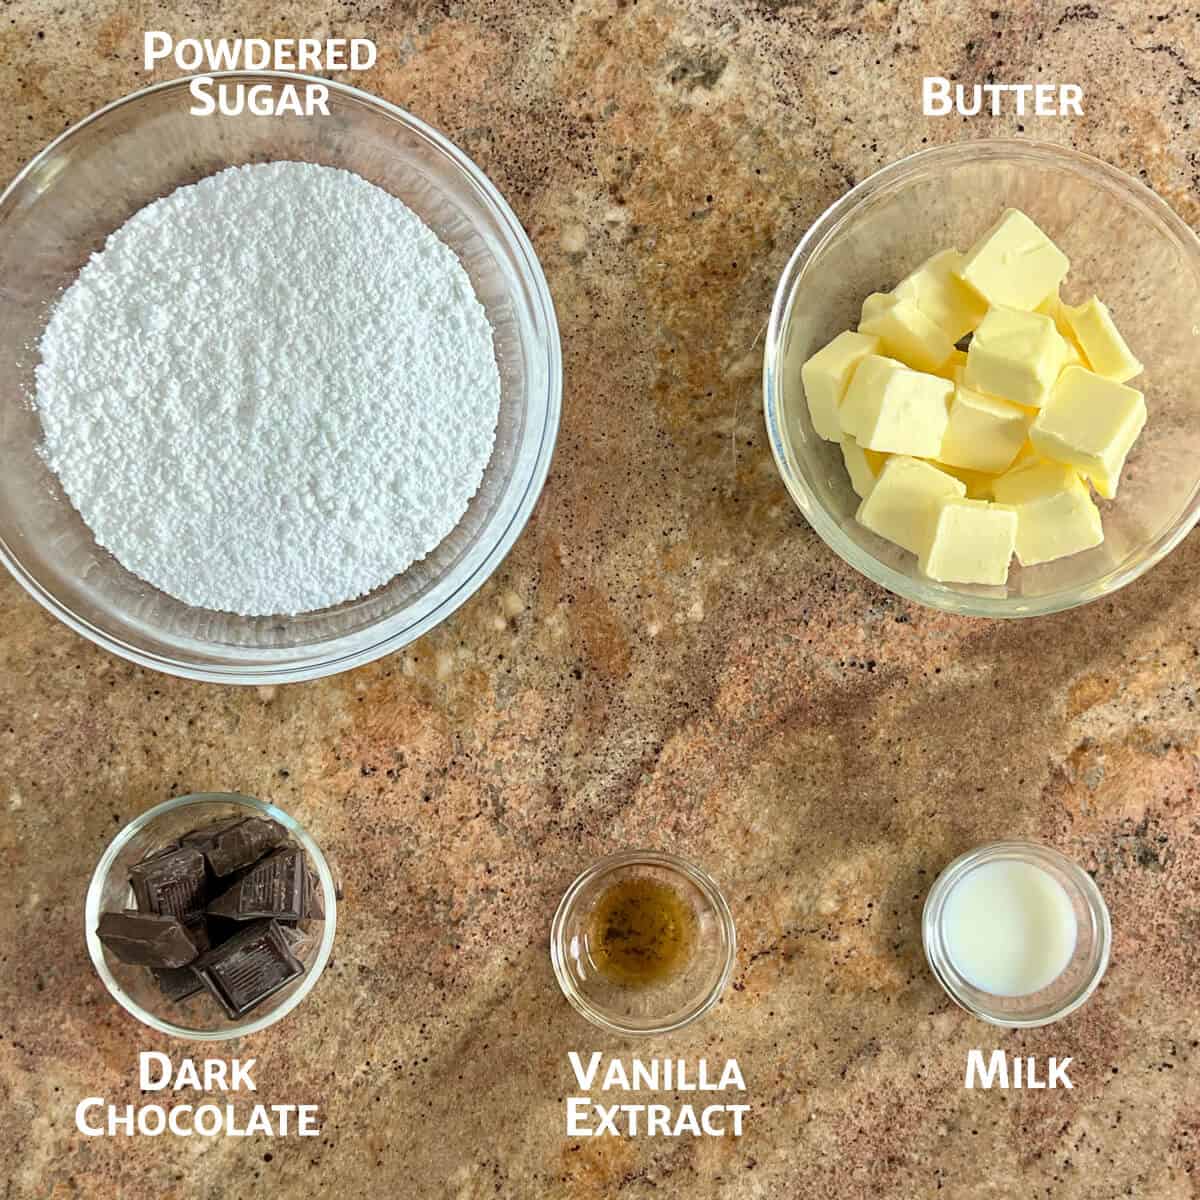 Ingredients for dark chocolate buttercream frosting portioned into glass bowls.